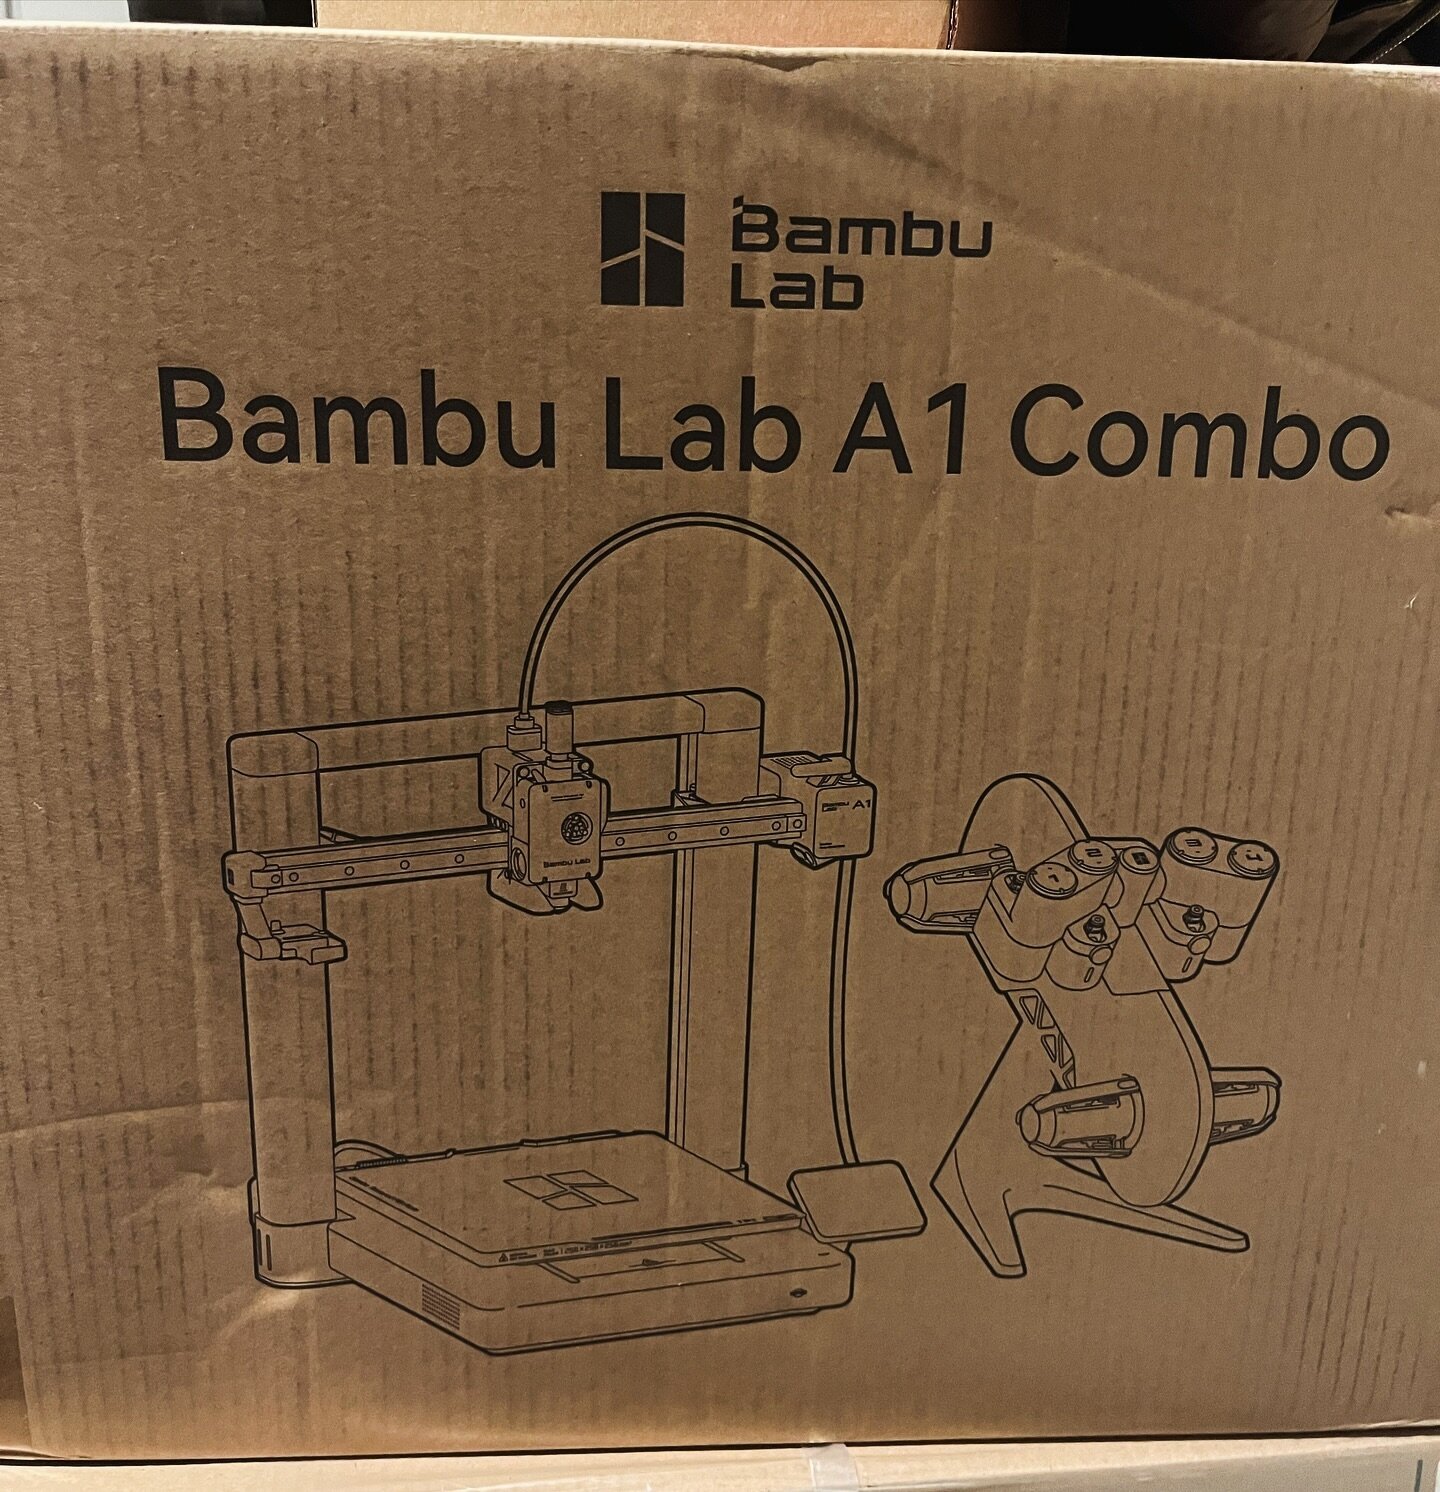 Wooho, delivery day thanks to @bambulab_official 
.
#3dprinter #bambulab #bambulabA1